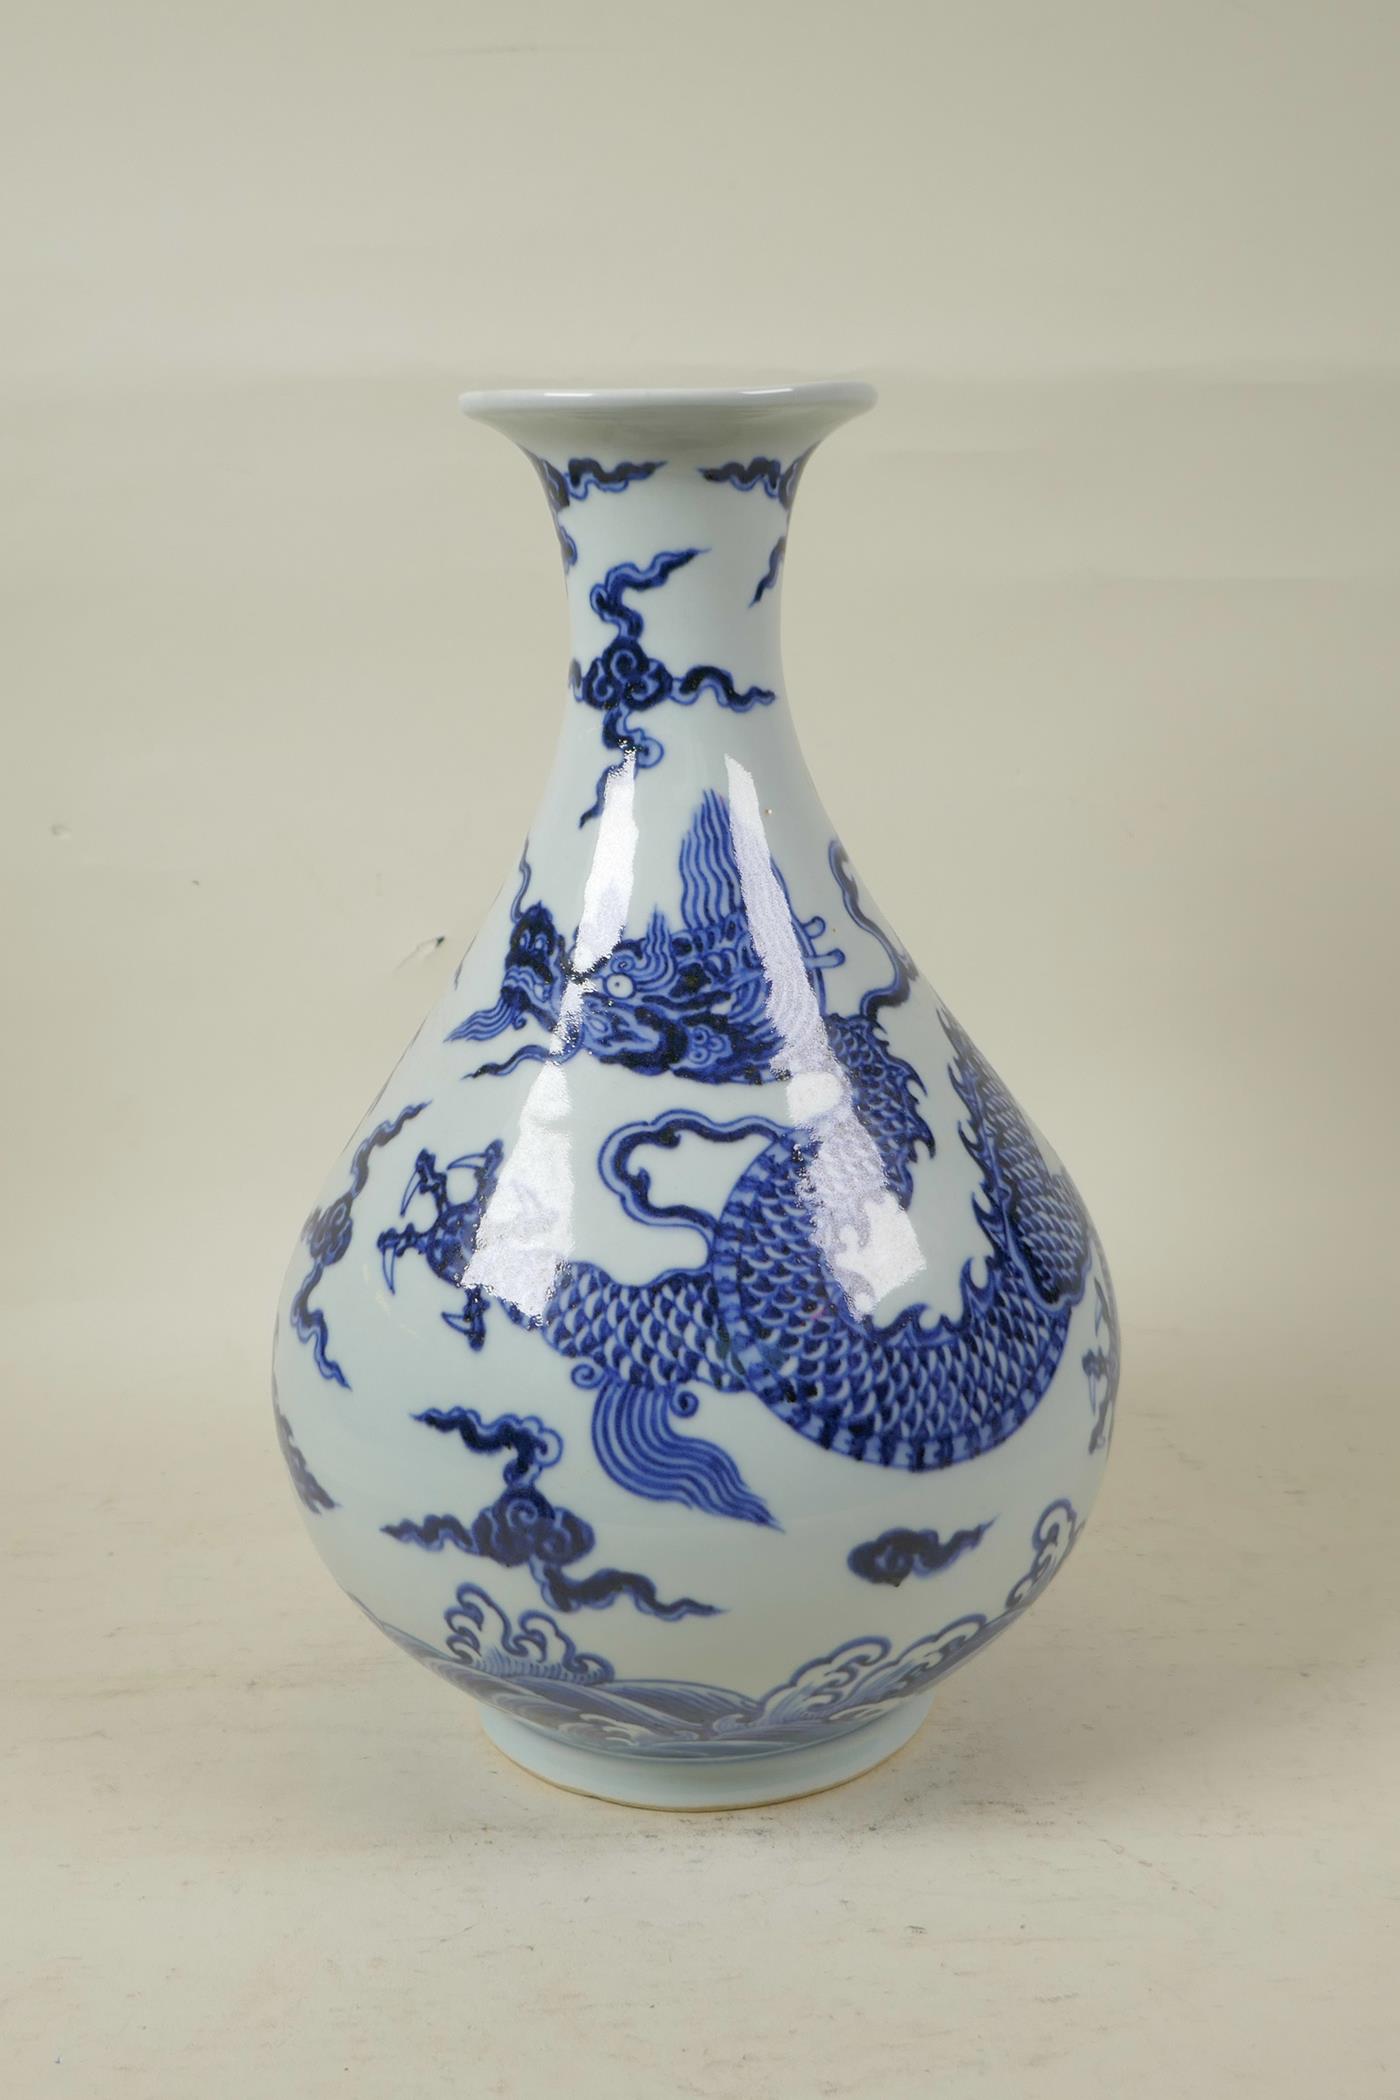 A Chinese blue and white porcelain pear shaped vase decorated with a dragon in flight, 12" high